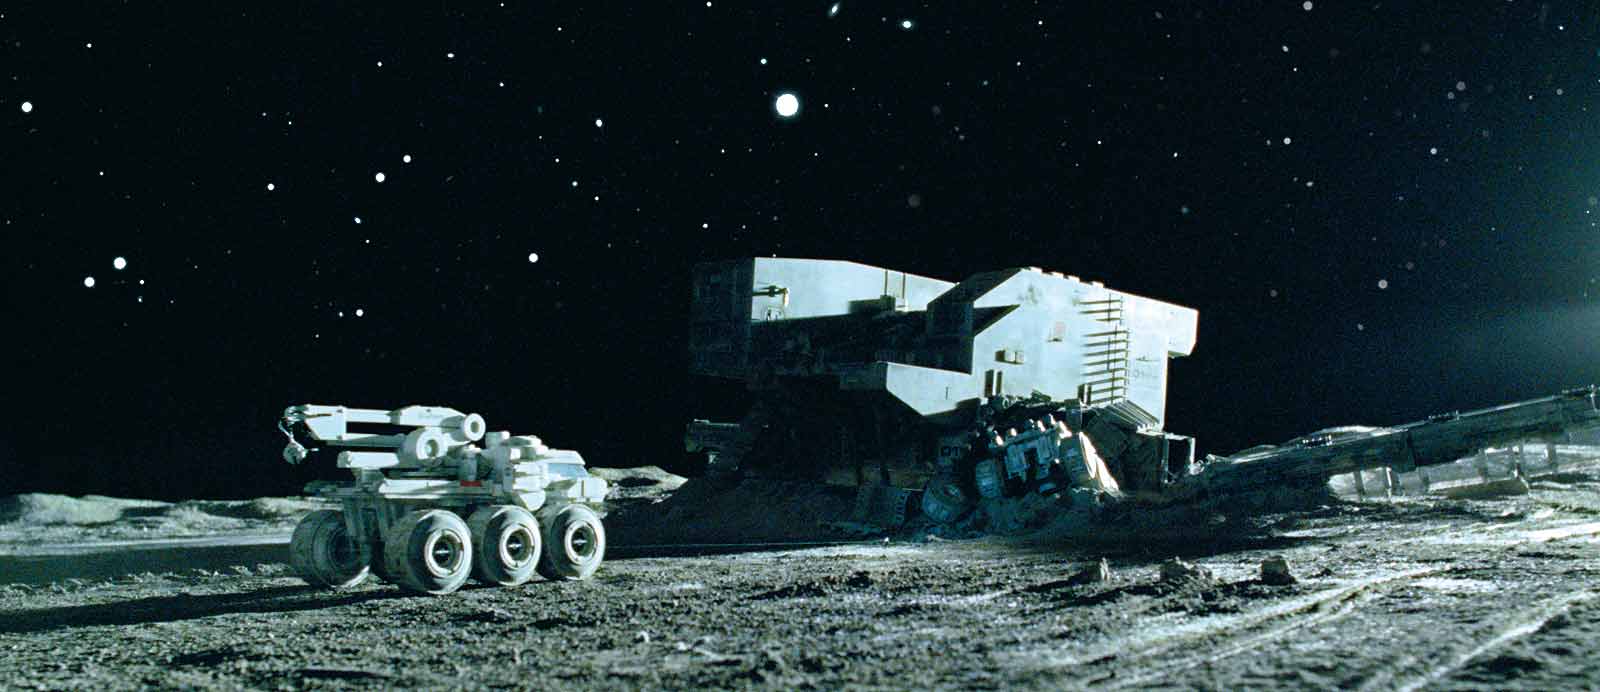 Still from Moon (2009) showing ground vehicles